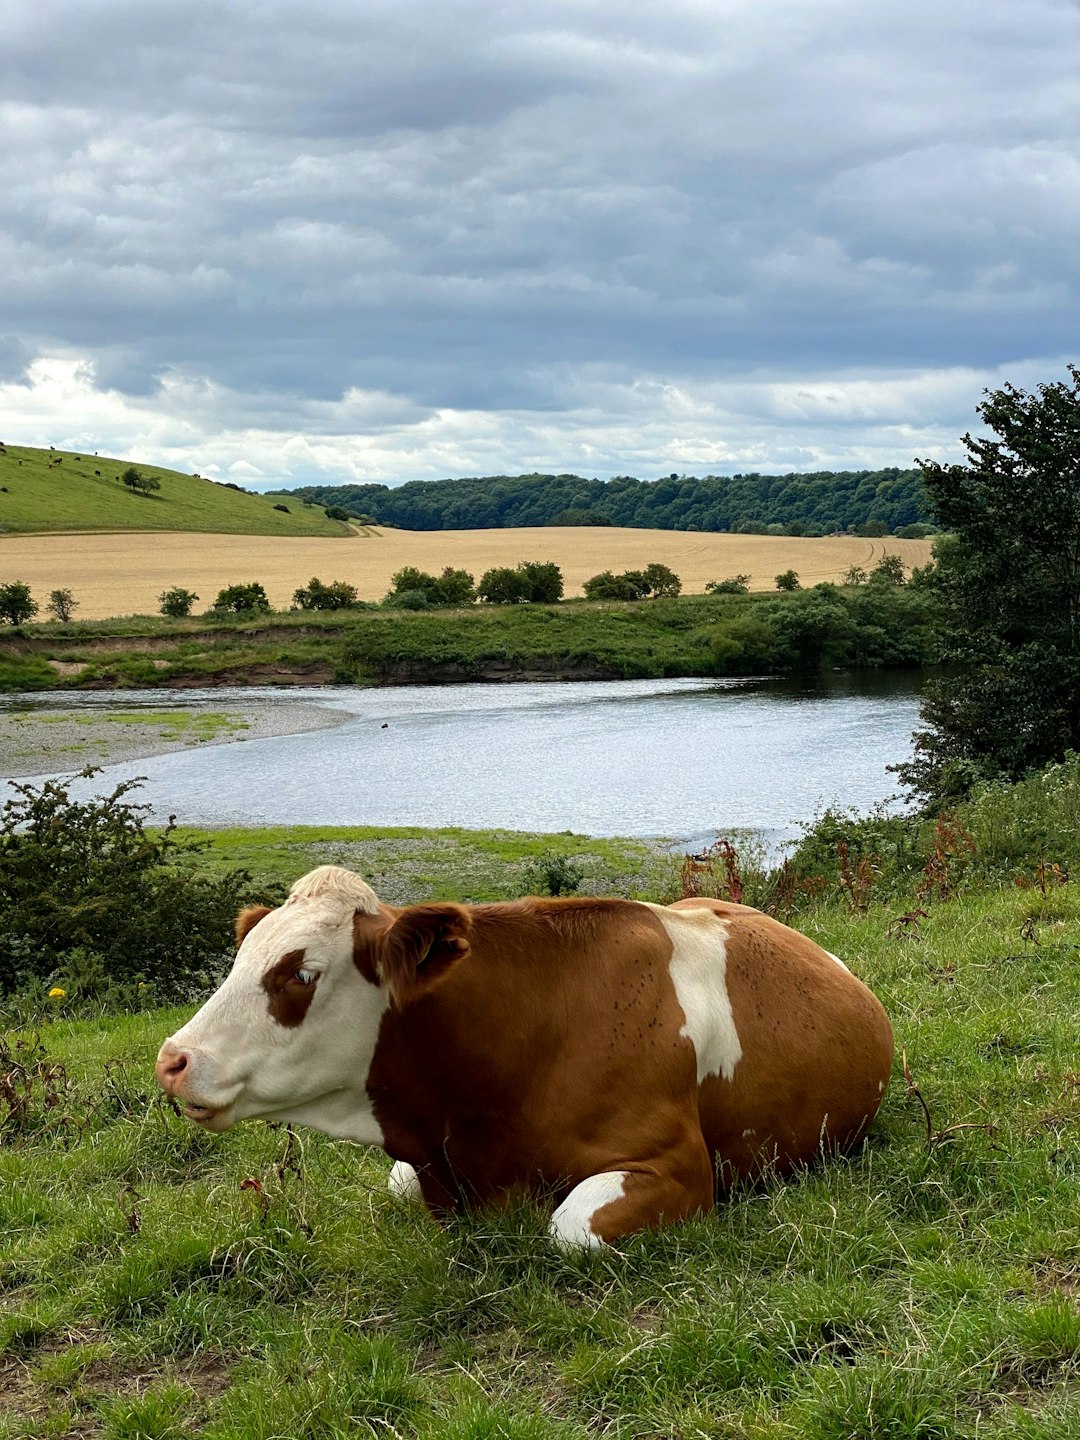 brown and white cow on green grass field near lake under blue sky during daytime